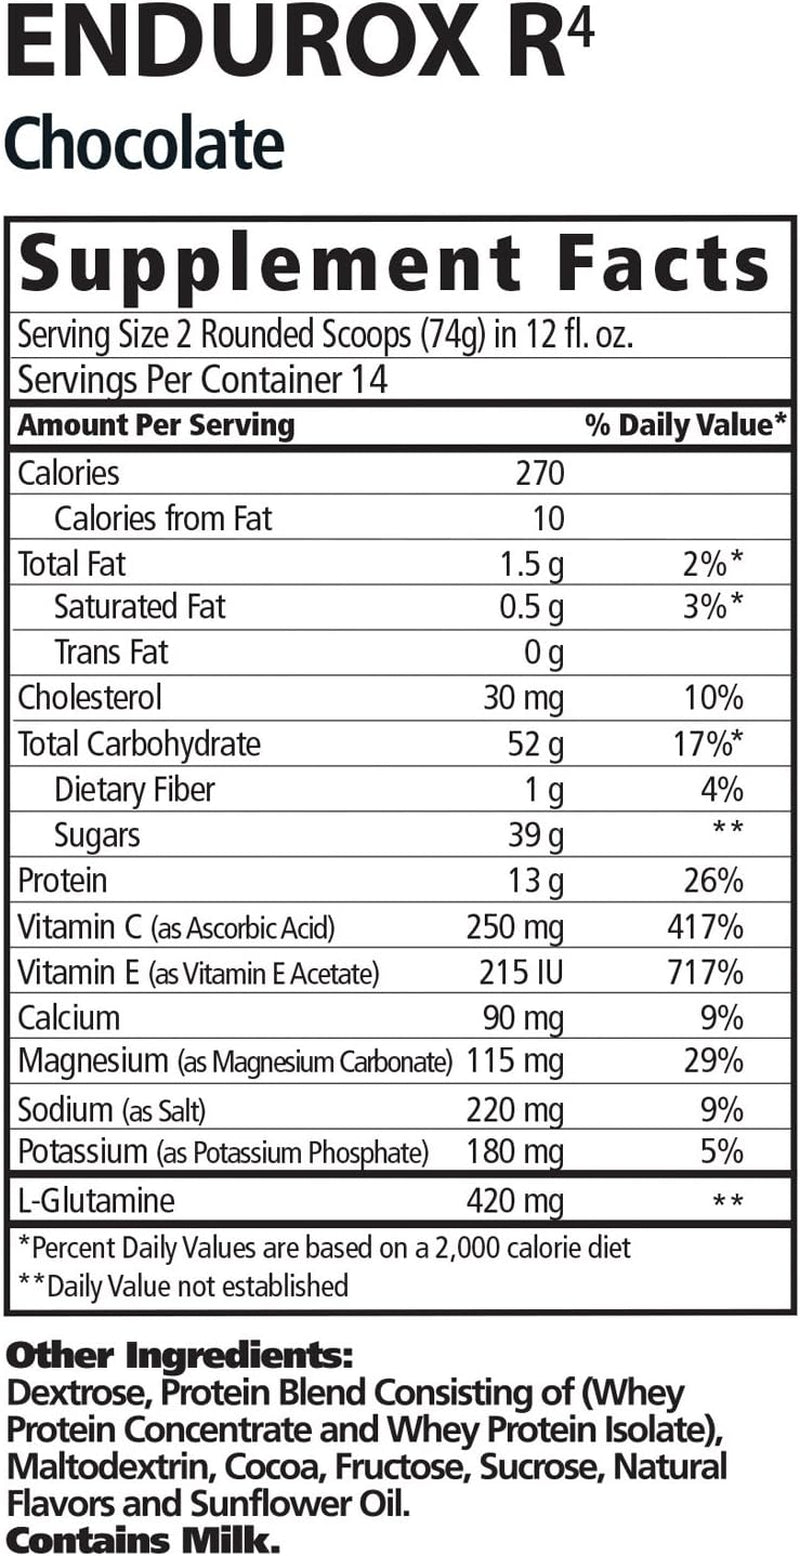 Endurox Pacifichealth R4, Post Workout Recovery Drink Mix with Protein, Carbs, Electrolytes and Antioxidants for Superior Muscle Recovery, Net Wt. 4.56 Lb, 28 Serving (Chocolate) with Shaker Cup